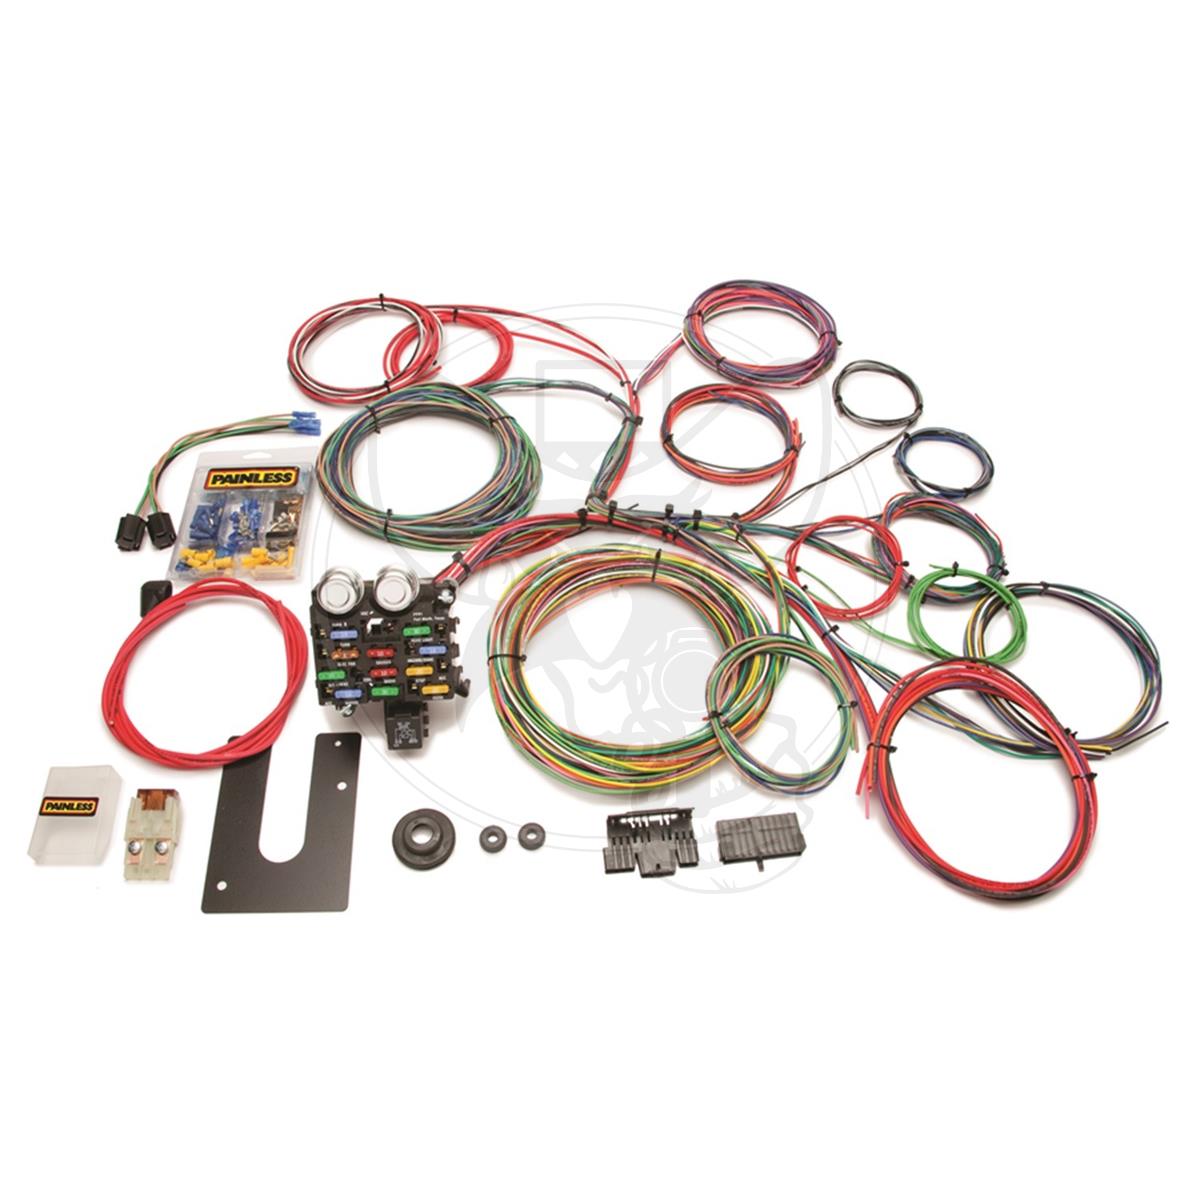 PAINLESS WIRING HARNESS KIT 21-CIRCUIT UNIVERSAL FITS NON-GM COLUMN